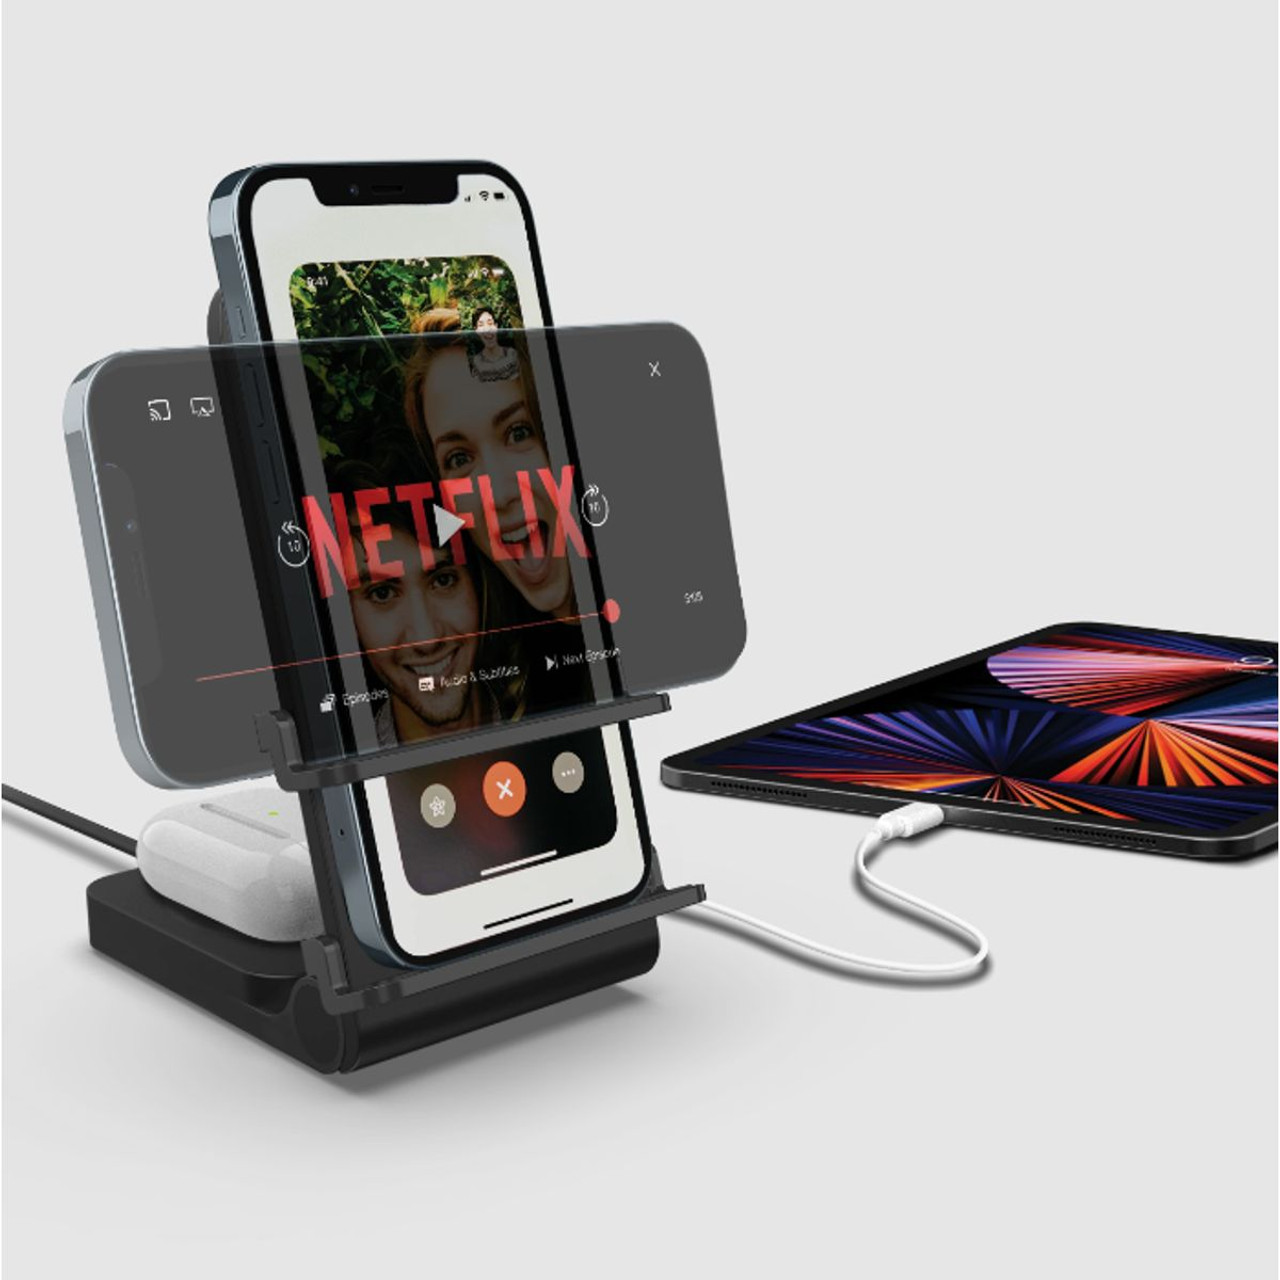 MyCharge 3-in-1 Wireless Charging Stand product image